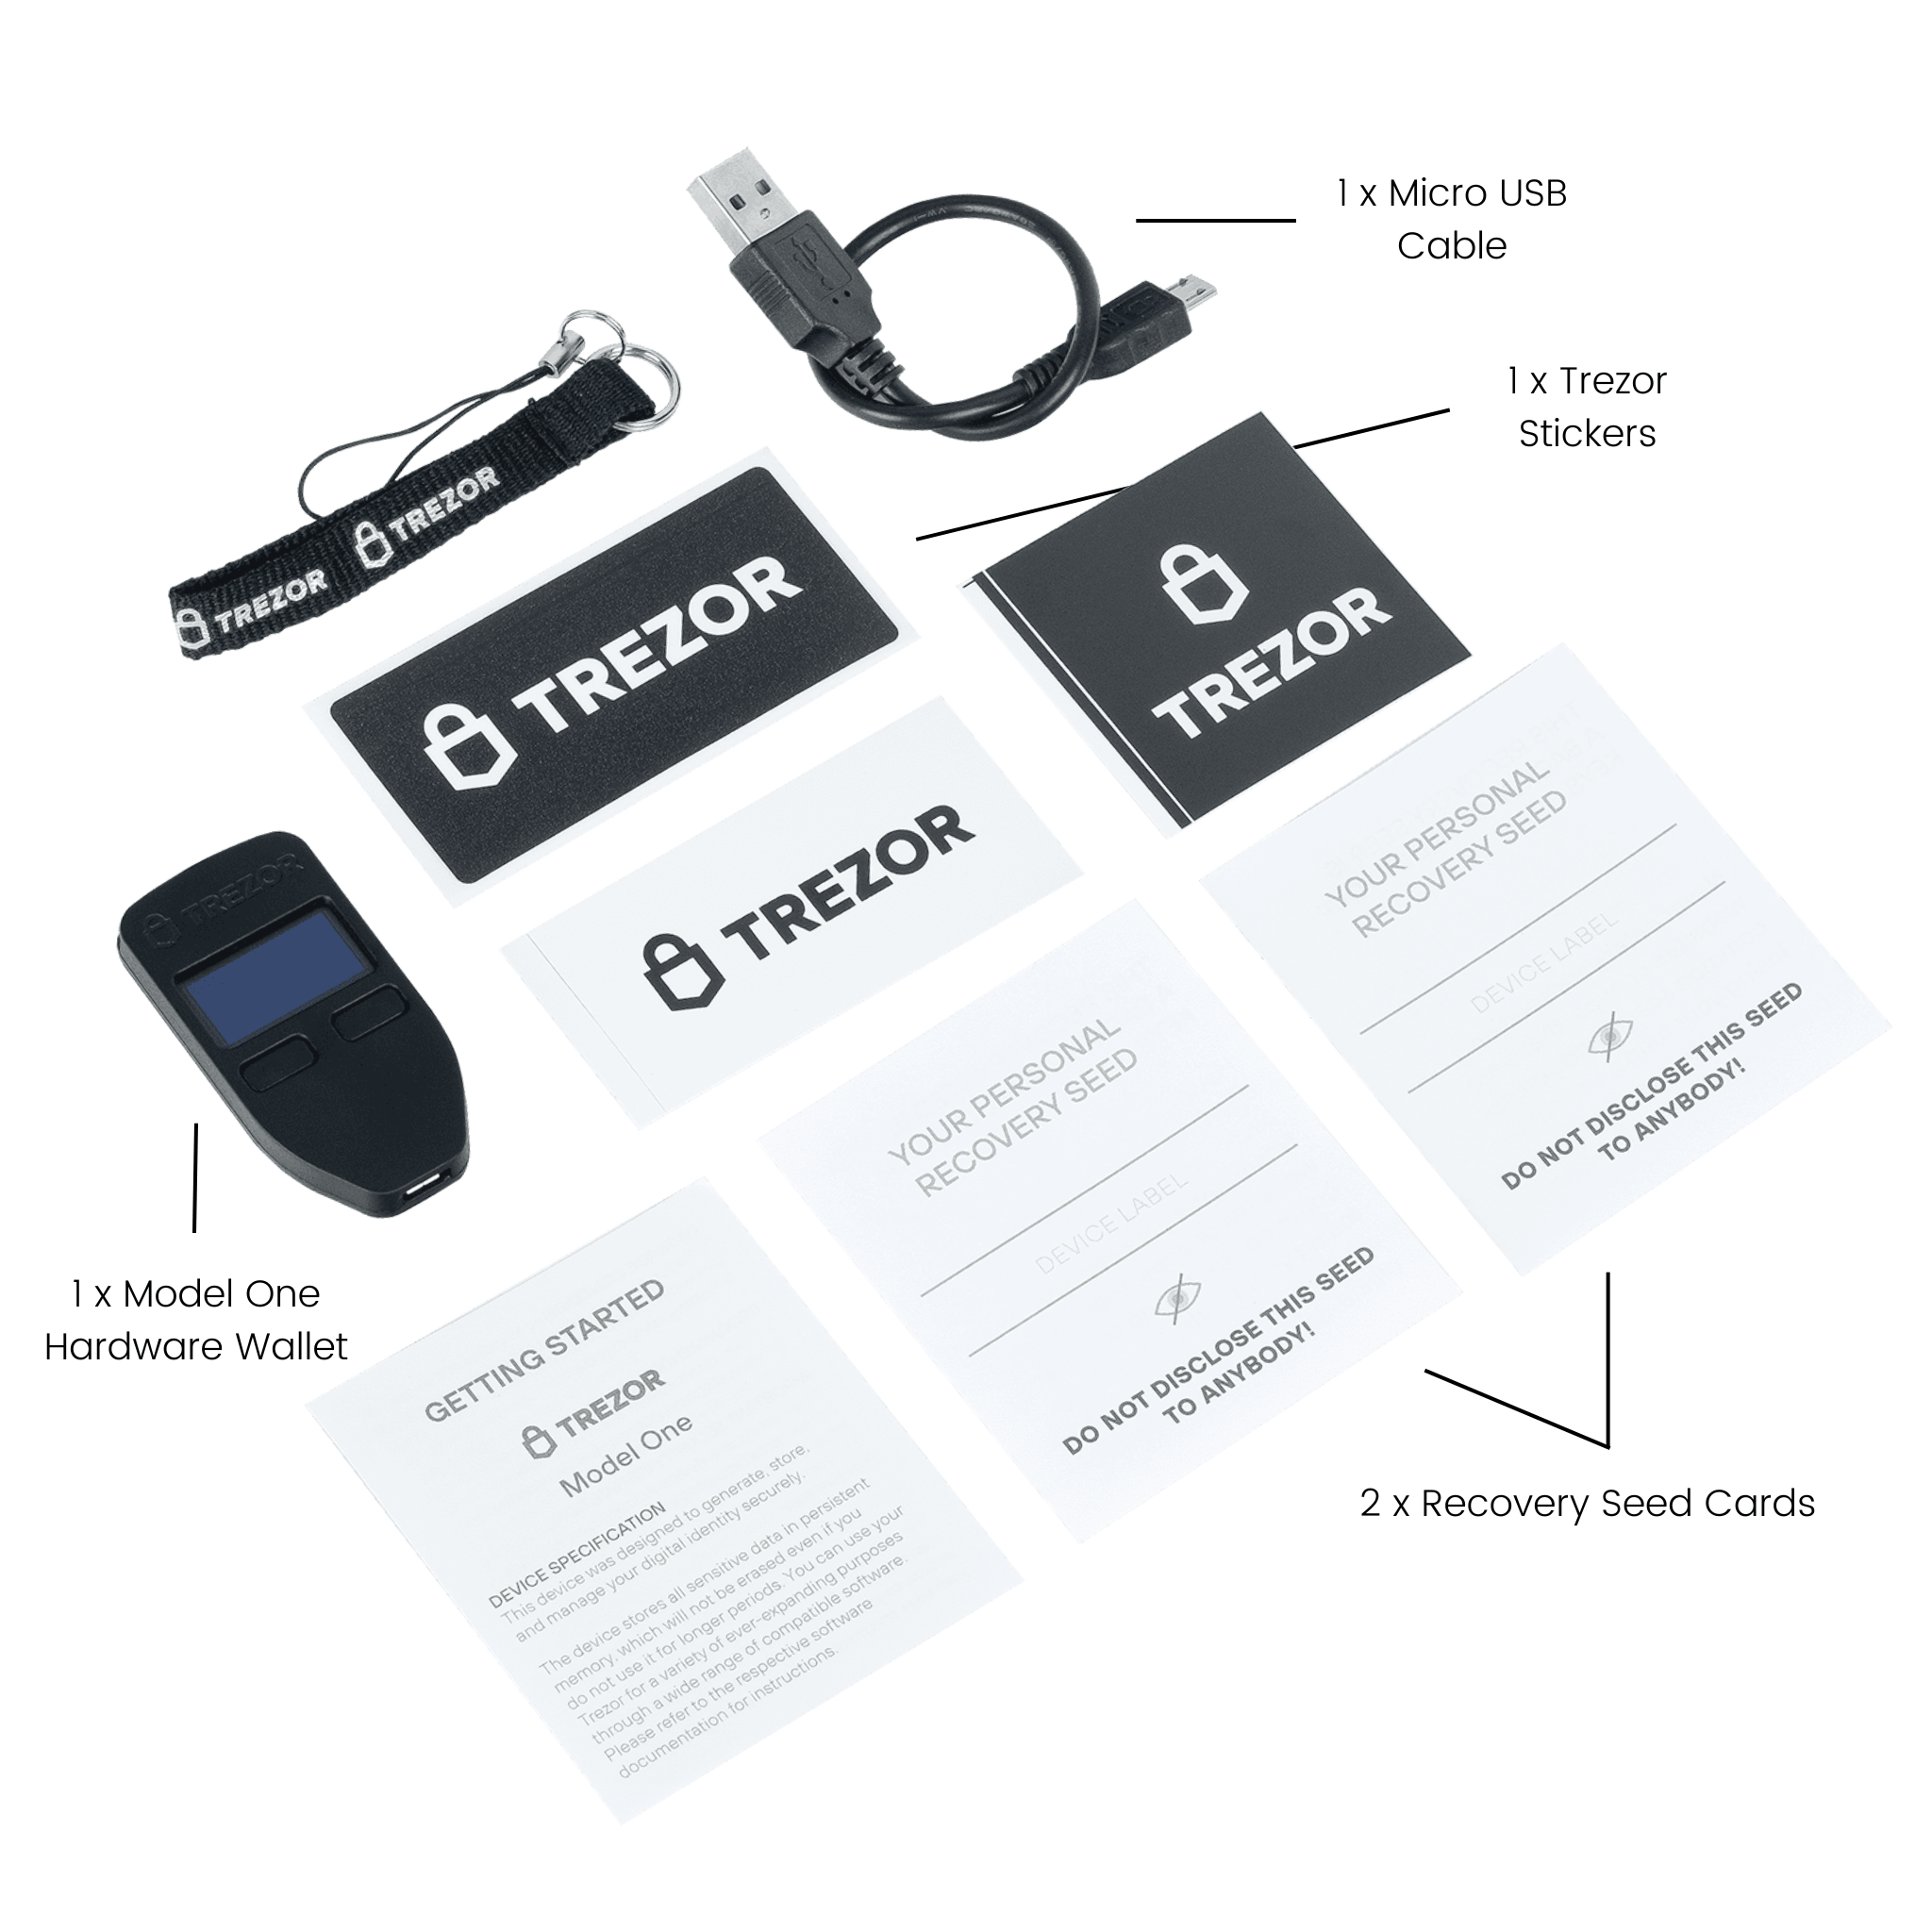 Trezor Model One Cryptocurrency Hardware Wallet Package Contents